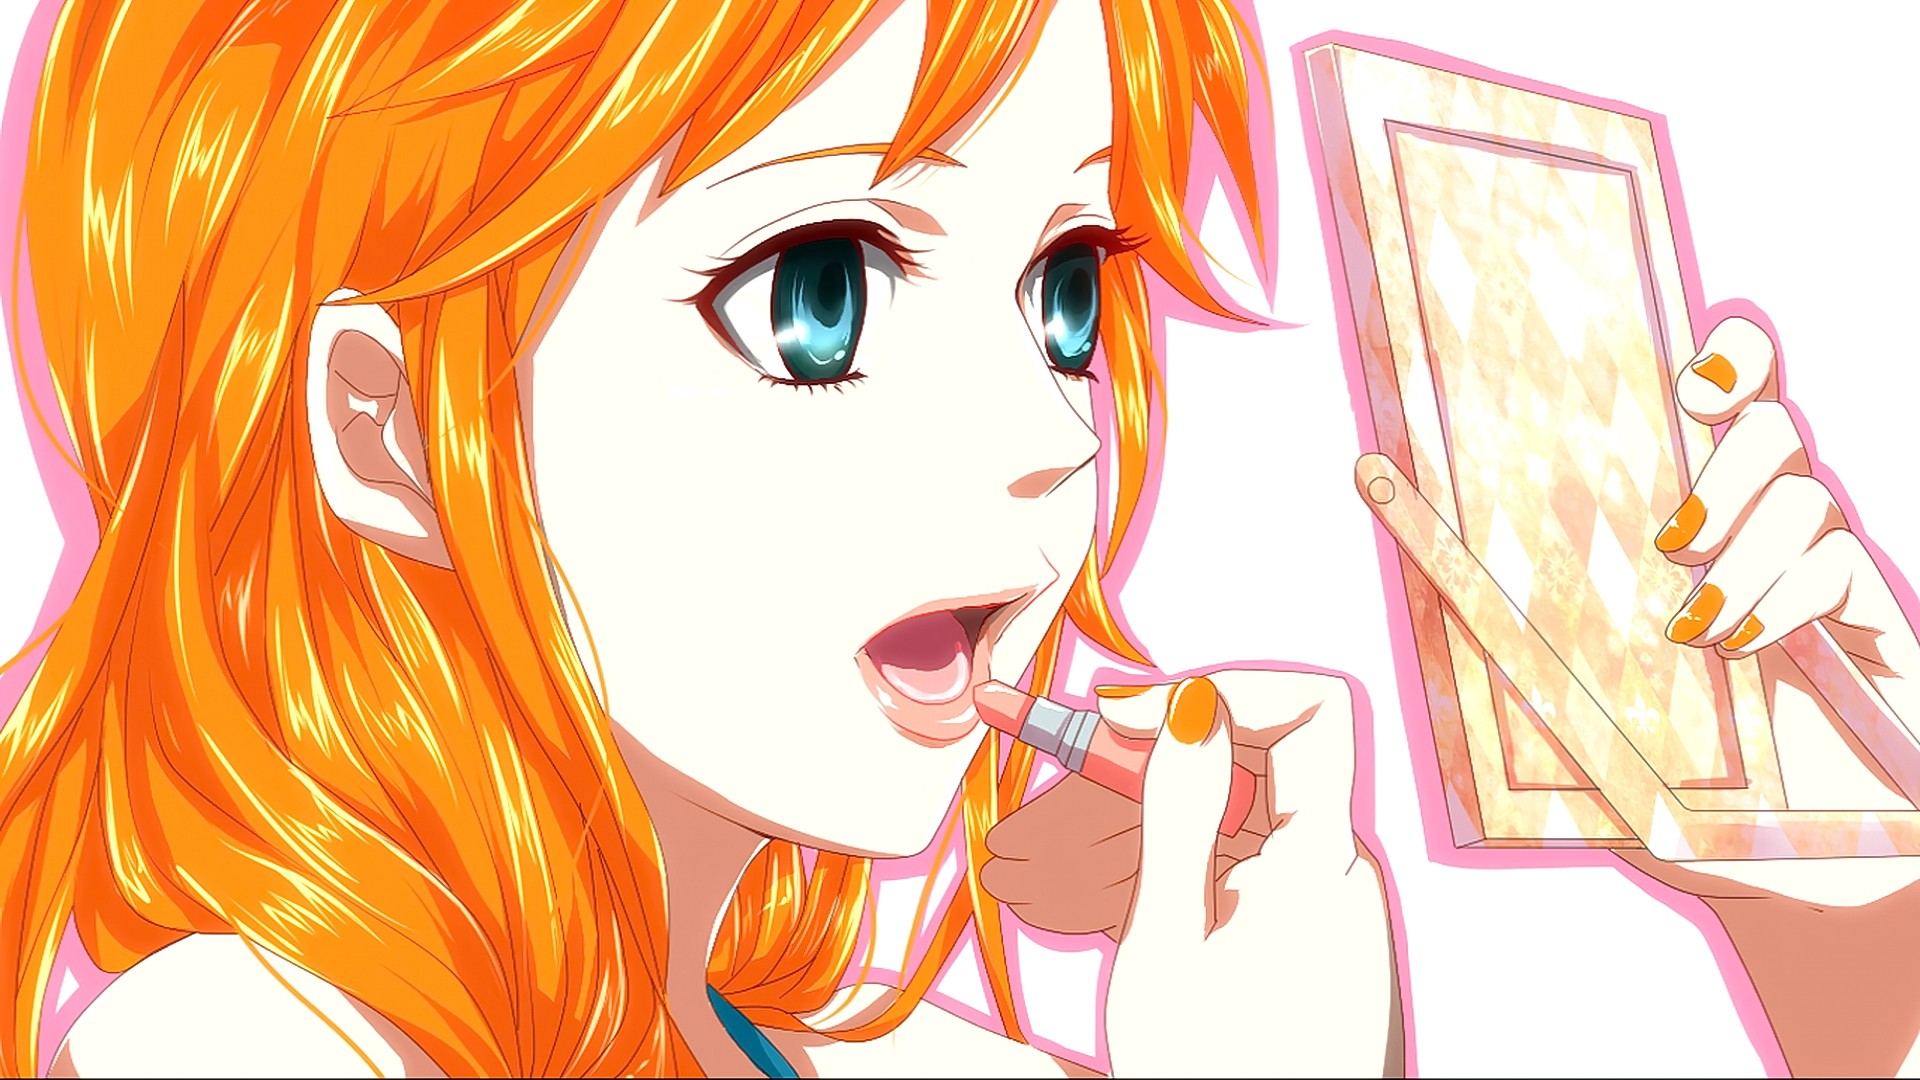 Anime 1920x1080 anime anime girls Nami One Piece white background redhead open mouth looking away makeup painted nails lipstick aqua eyes